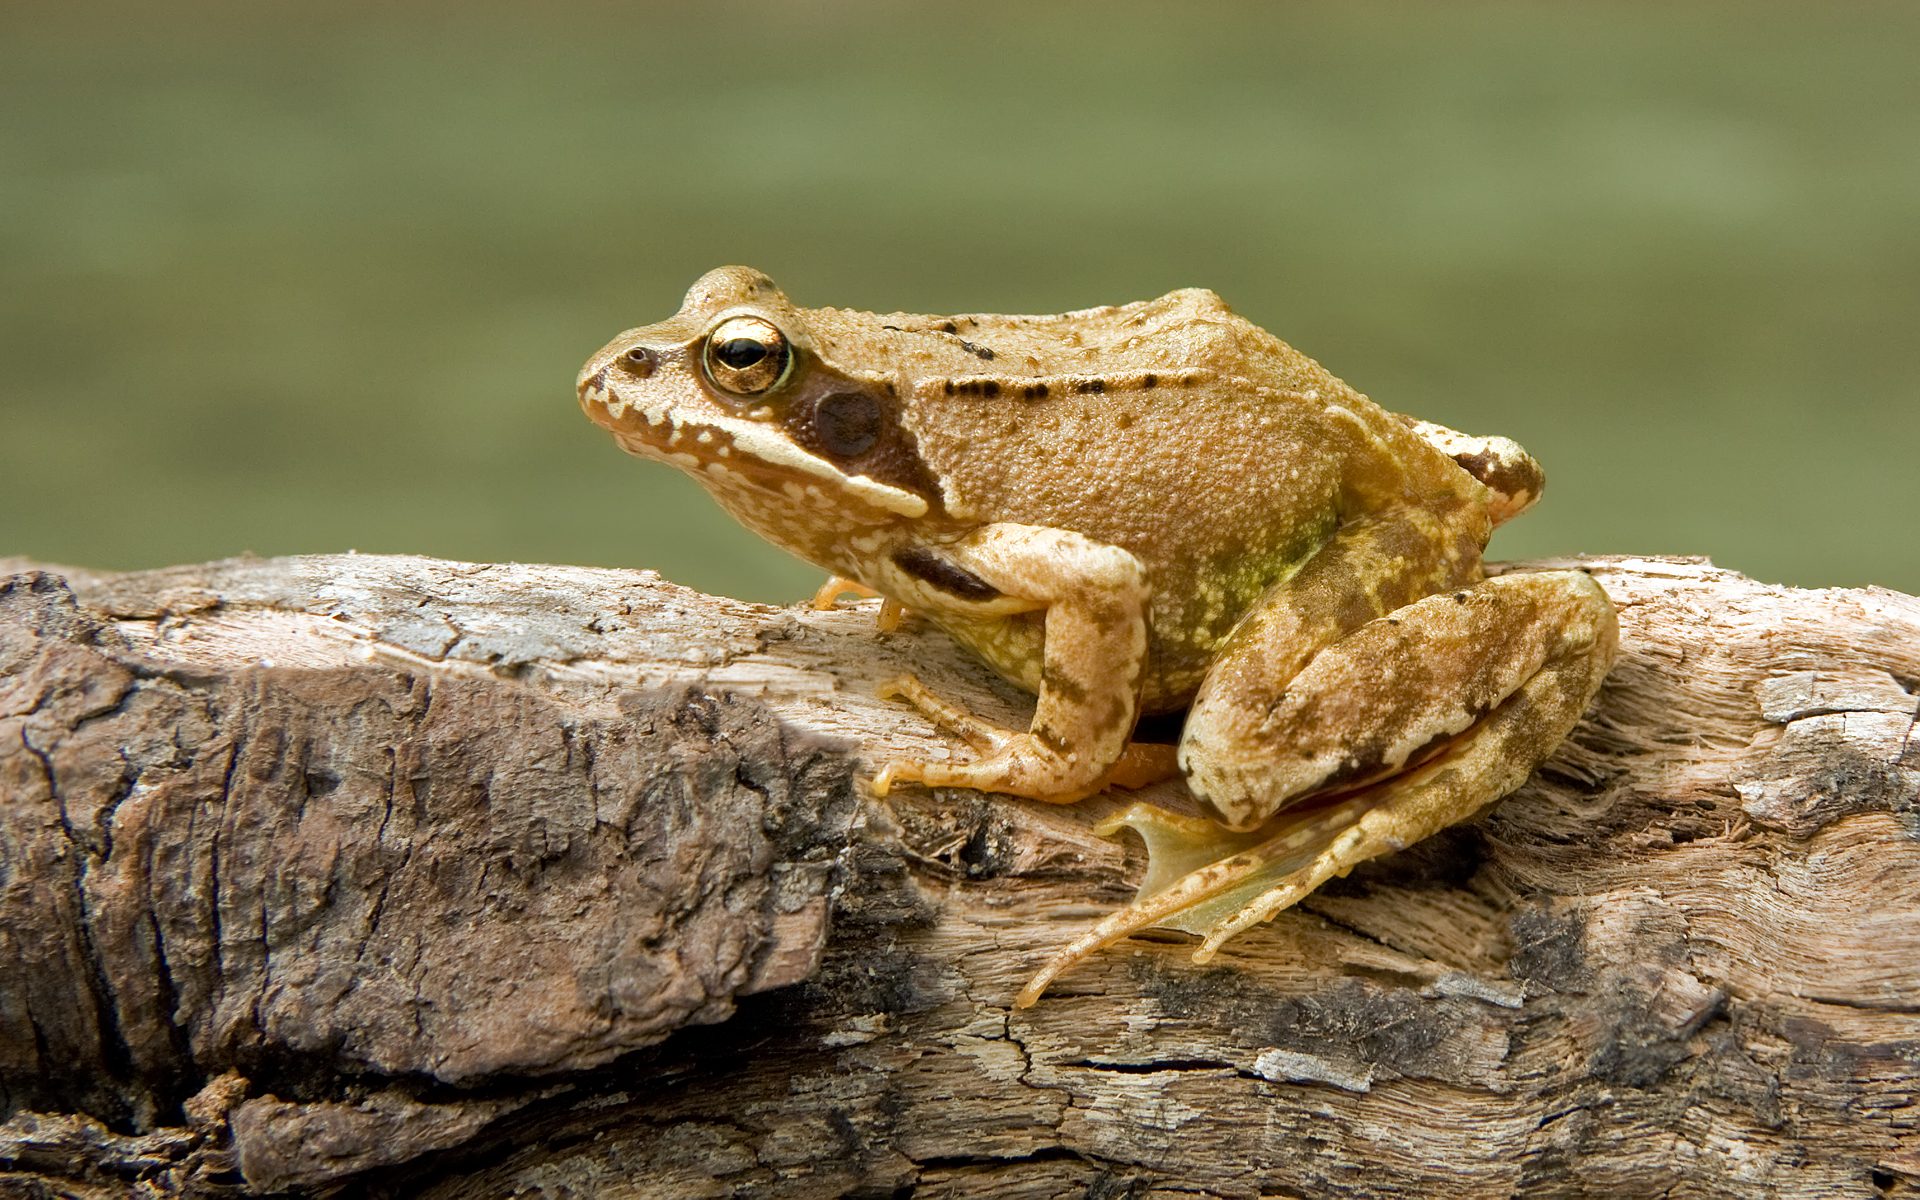 What are regular frogs called?